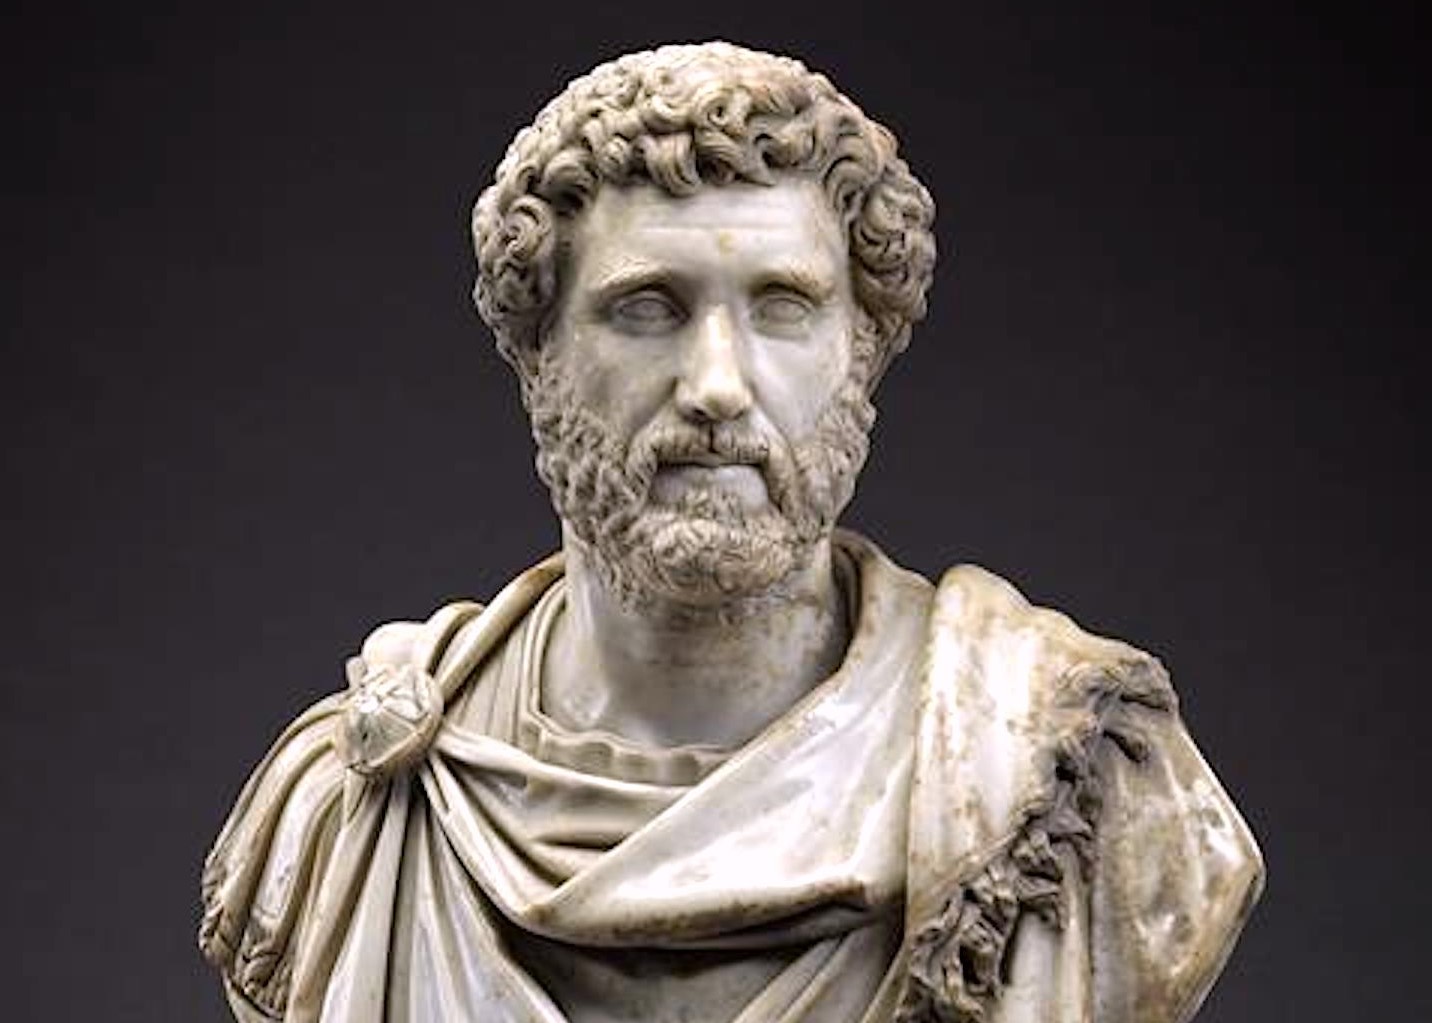 Getty Museum Acquires Bearded Roman Bust in Need of Shave